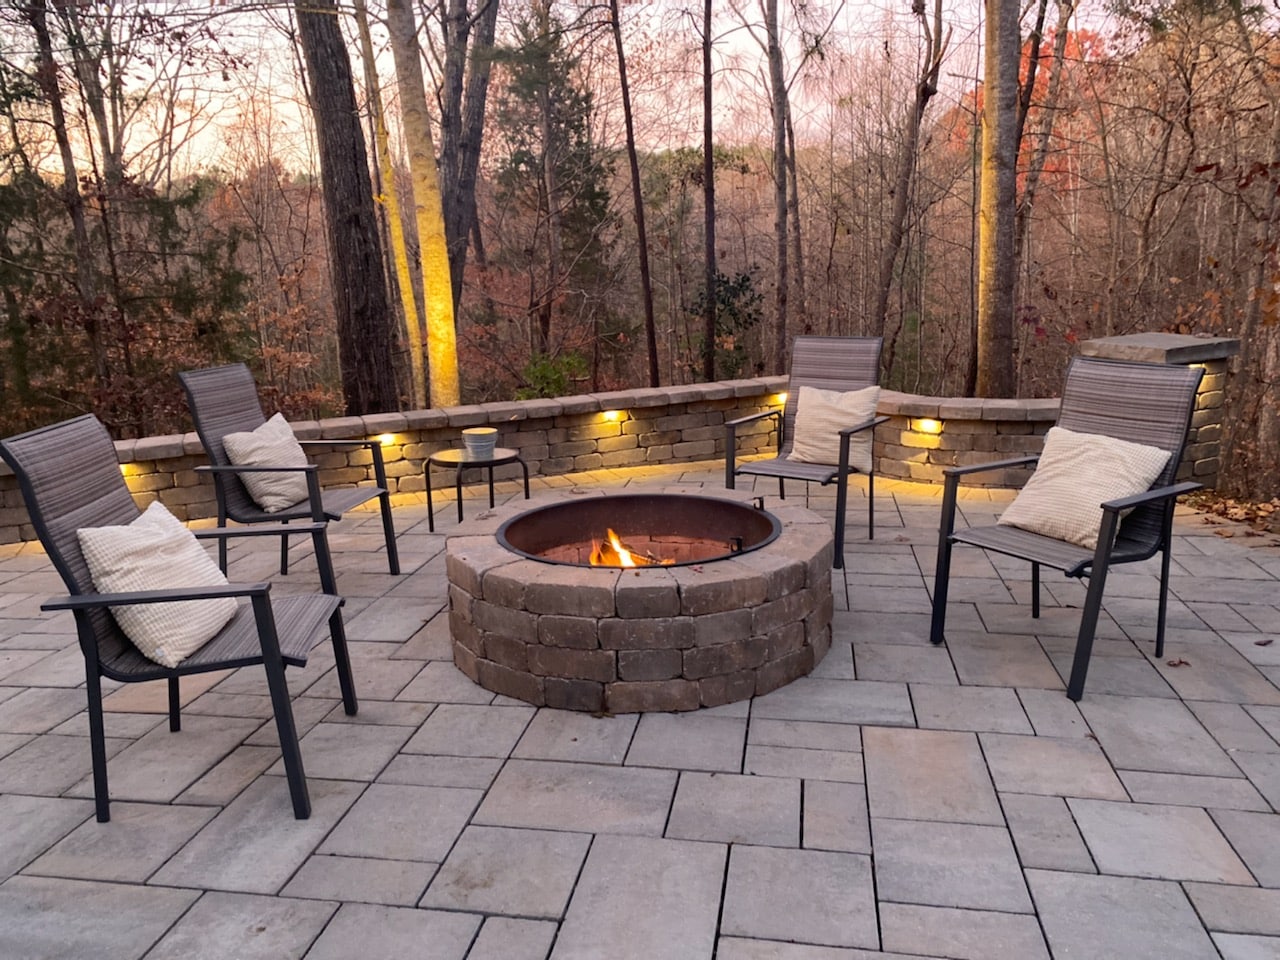 A patio with a fire pit in the middle of a wooded area.